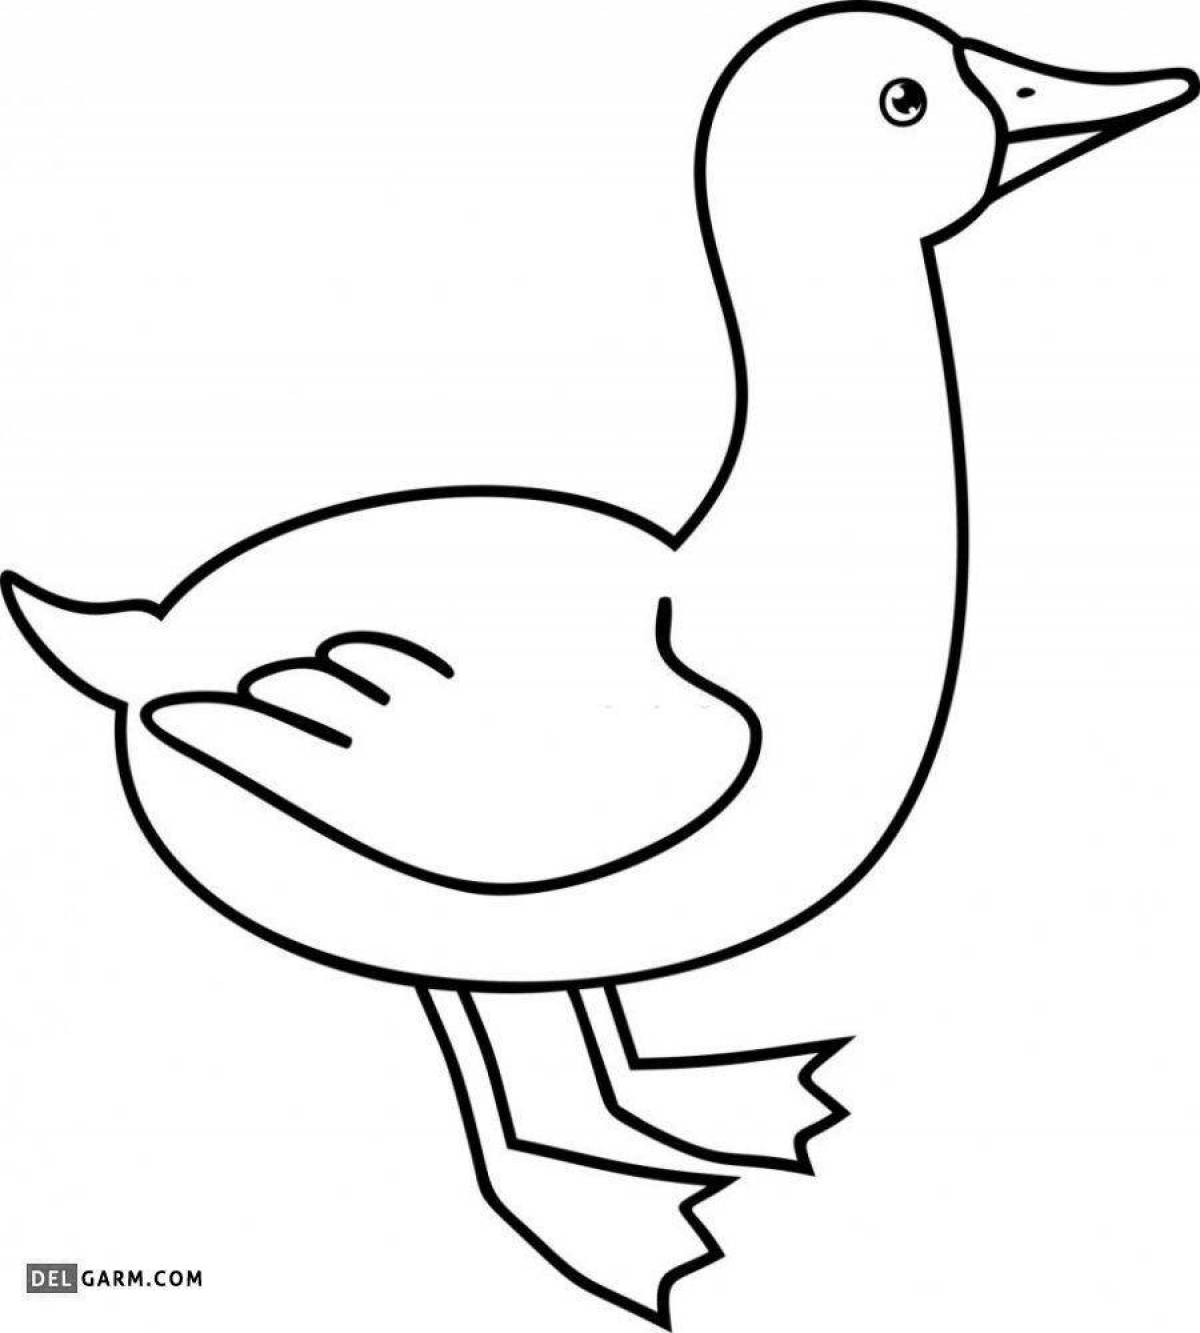 Adorable goose coloring book for kids 6-7 years old